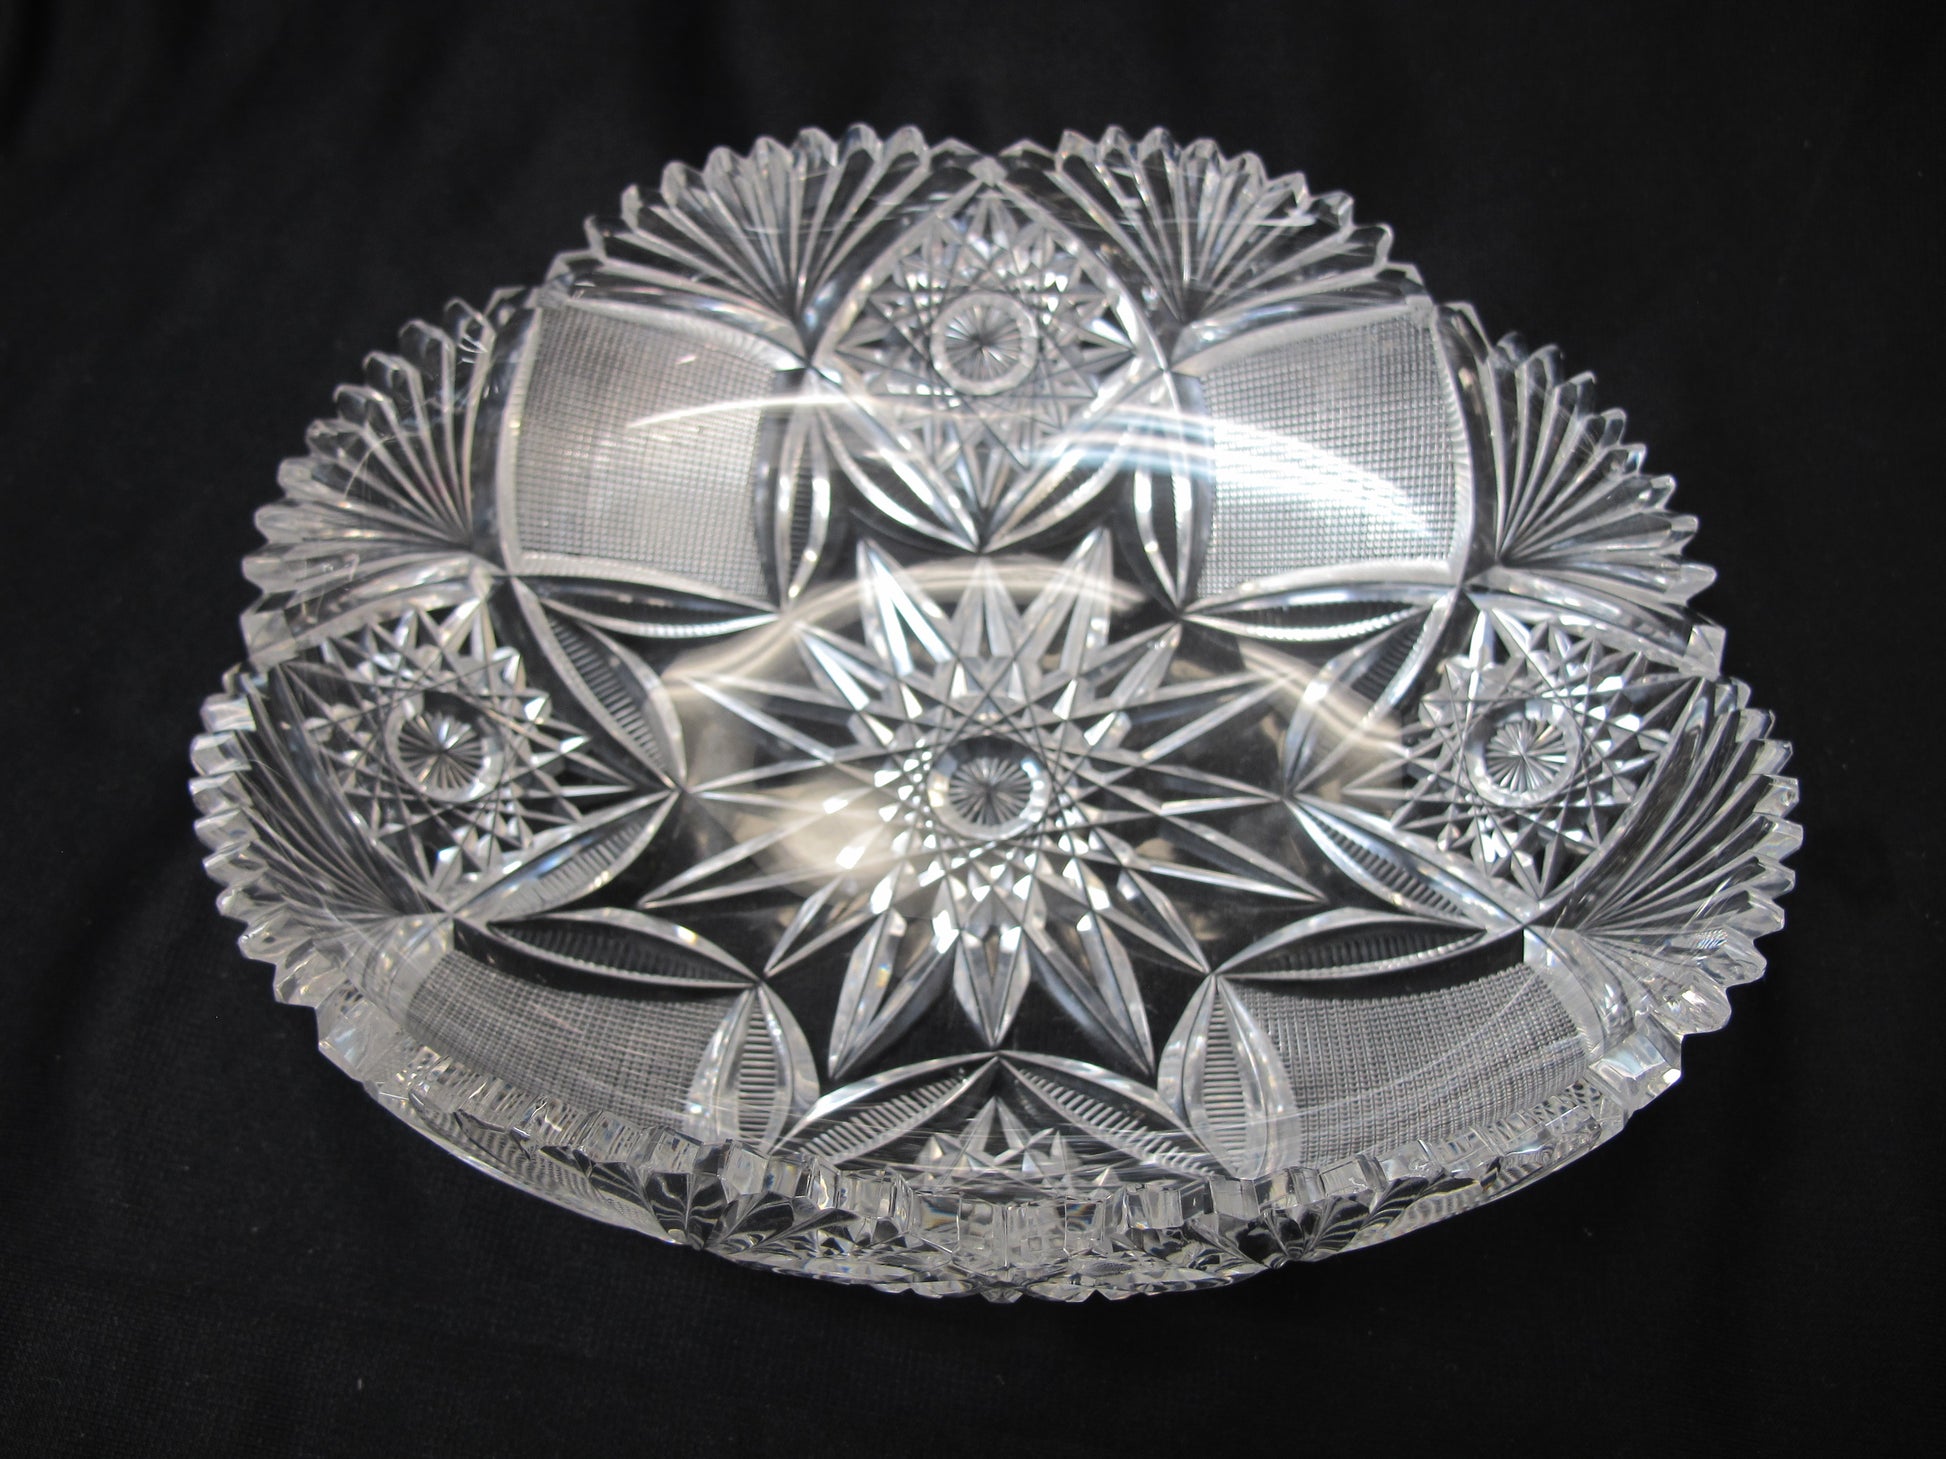 L. Straus Imperial American Brilliant Period hand Cut Glass oval bowl abp - O'Rourke crystal awards & gifts abp cut glass